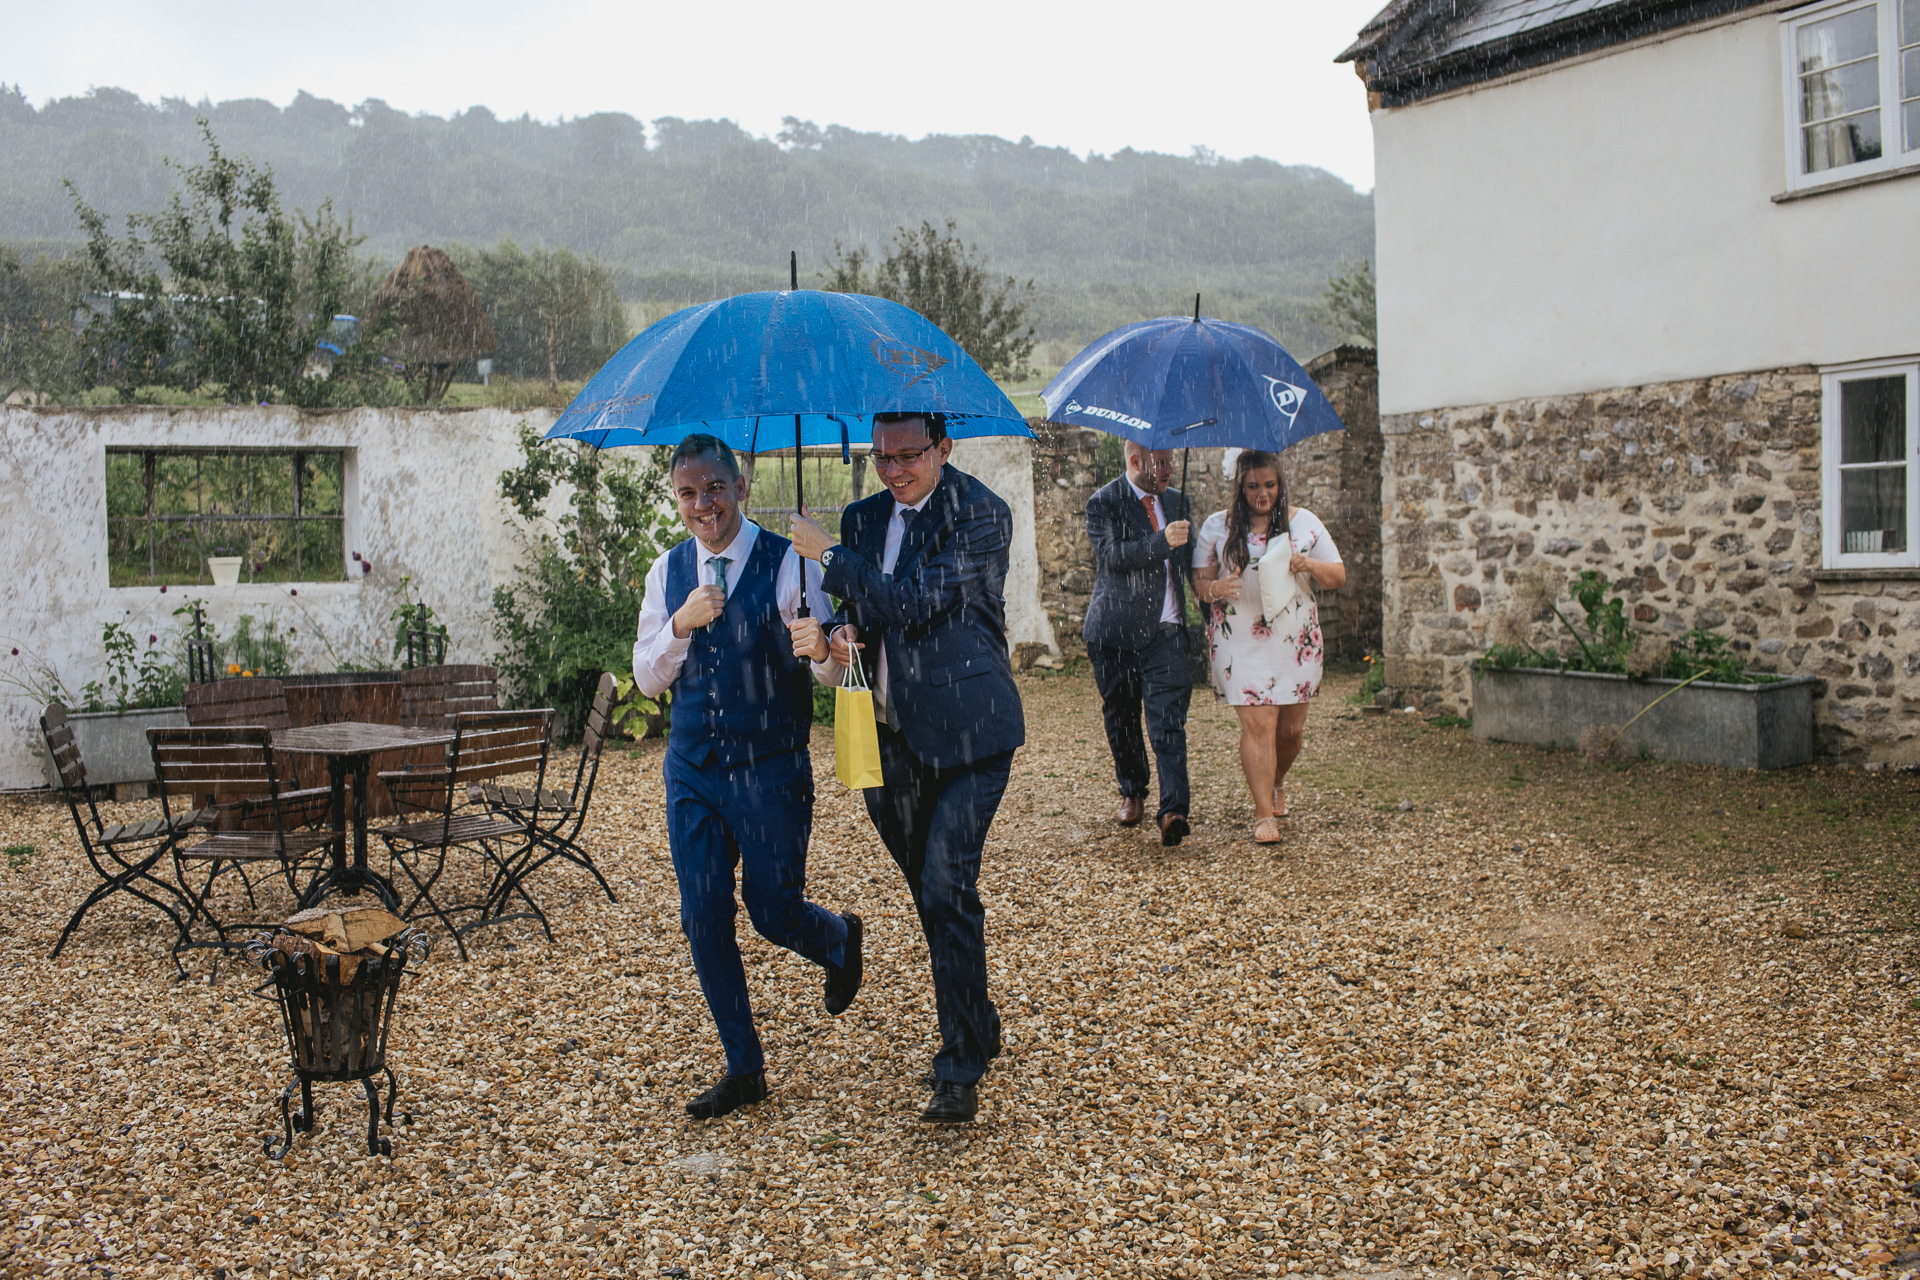 A wet weather wedding with guests running away from the ceremony in the pouring rain